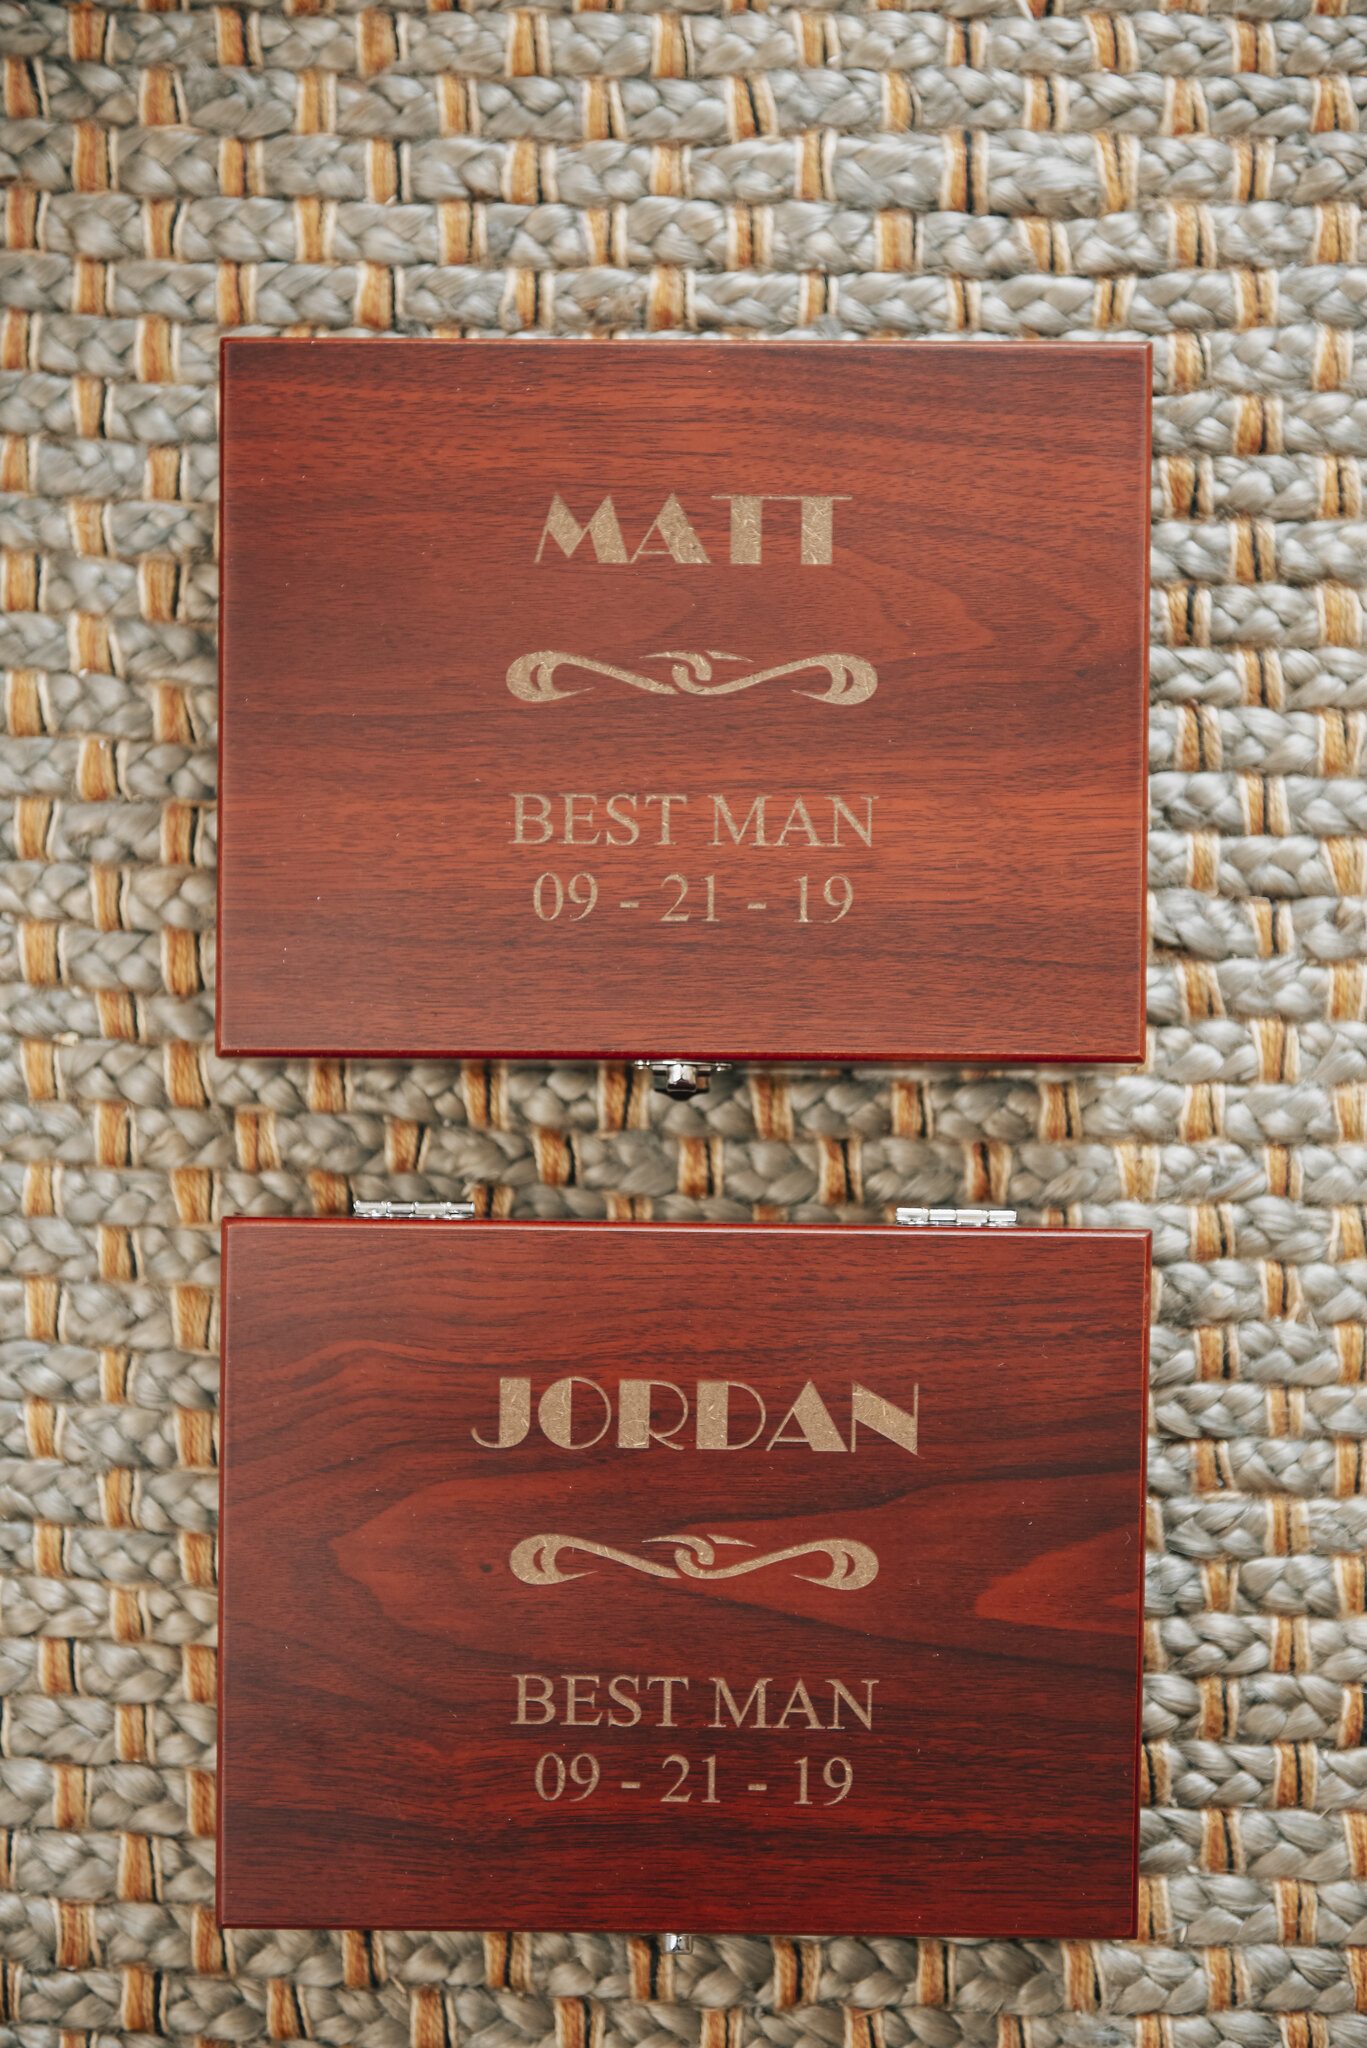  Custom gift boxes for the groomsmen. Inside were wallets and knives with the guys’ names on them. 